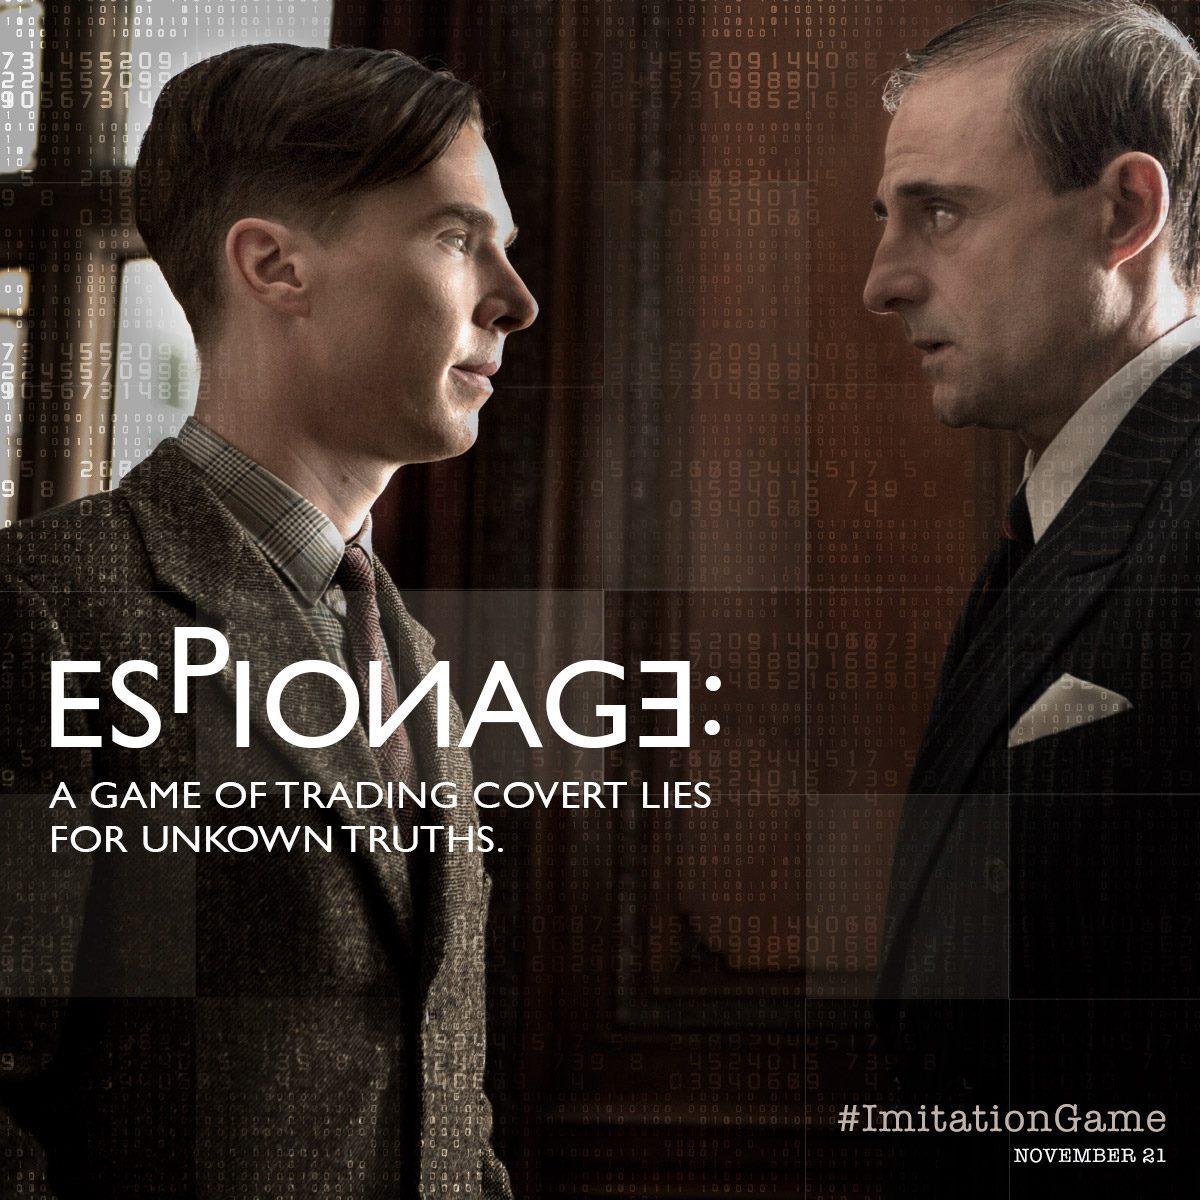  The Imitation Game @ImitationGame ·  Oct 14 To uncover the truth, ask the right